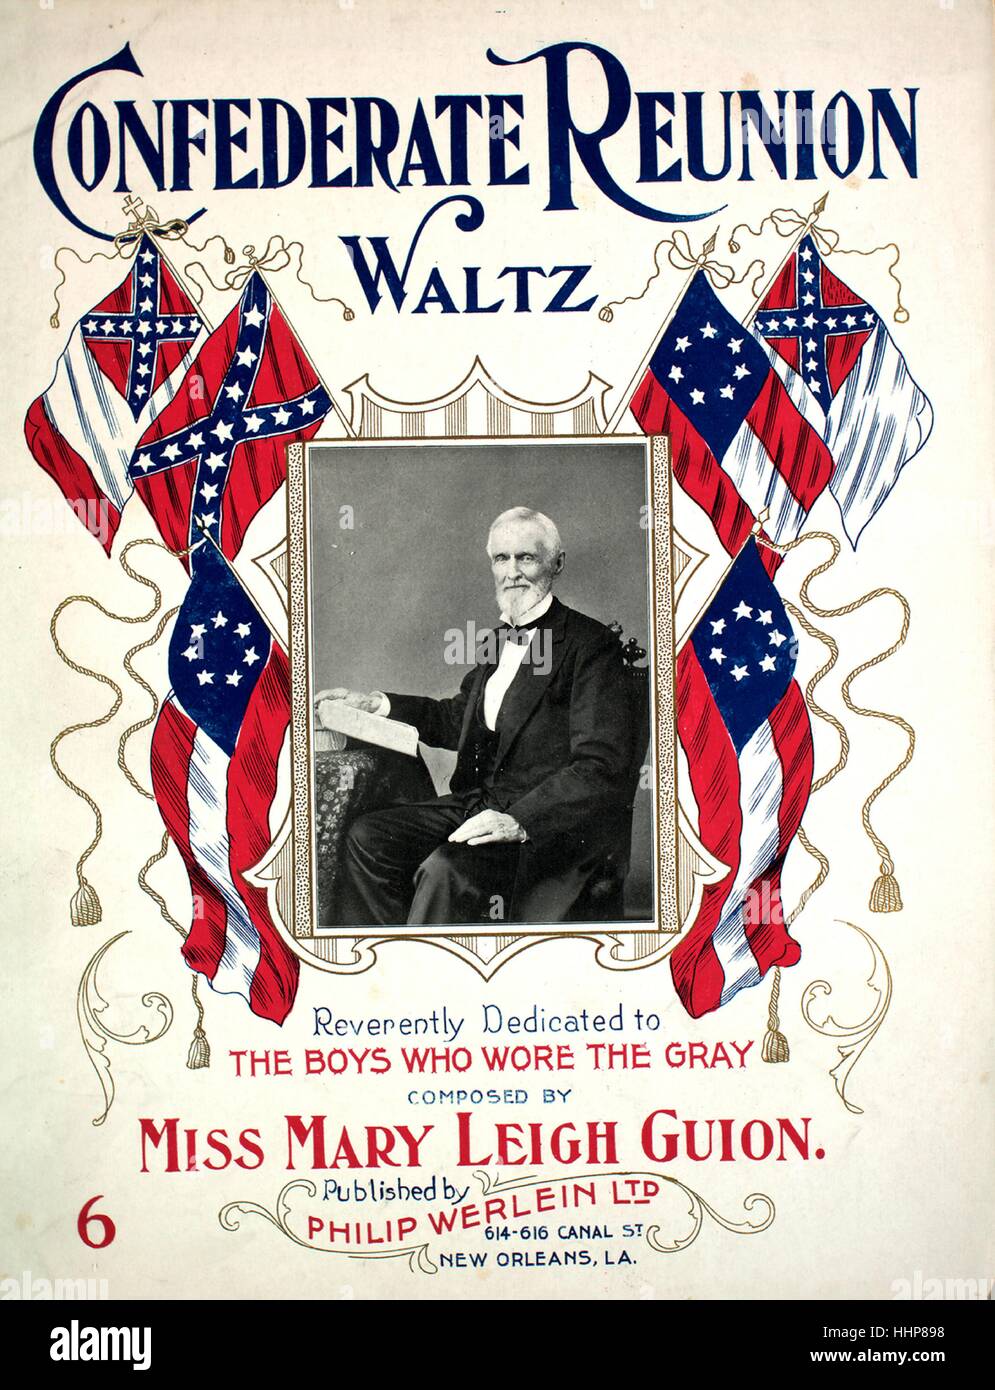 Sheet music cover image of the song 'Confederate Reunion Waltz', with original authorship notes reading 'Composed by Miss Mary Leigh Guion', 1900. The publisher is listed as 'Philip Werlein Ltd., 614-616 Canal St.', the form of composition is 'sectional', the instrumentation is 'piano', the first line reads 'None', and the illustration artist is listed as 'None'. Stock Photo